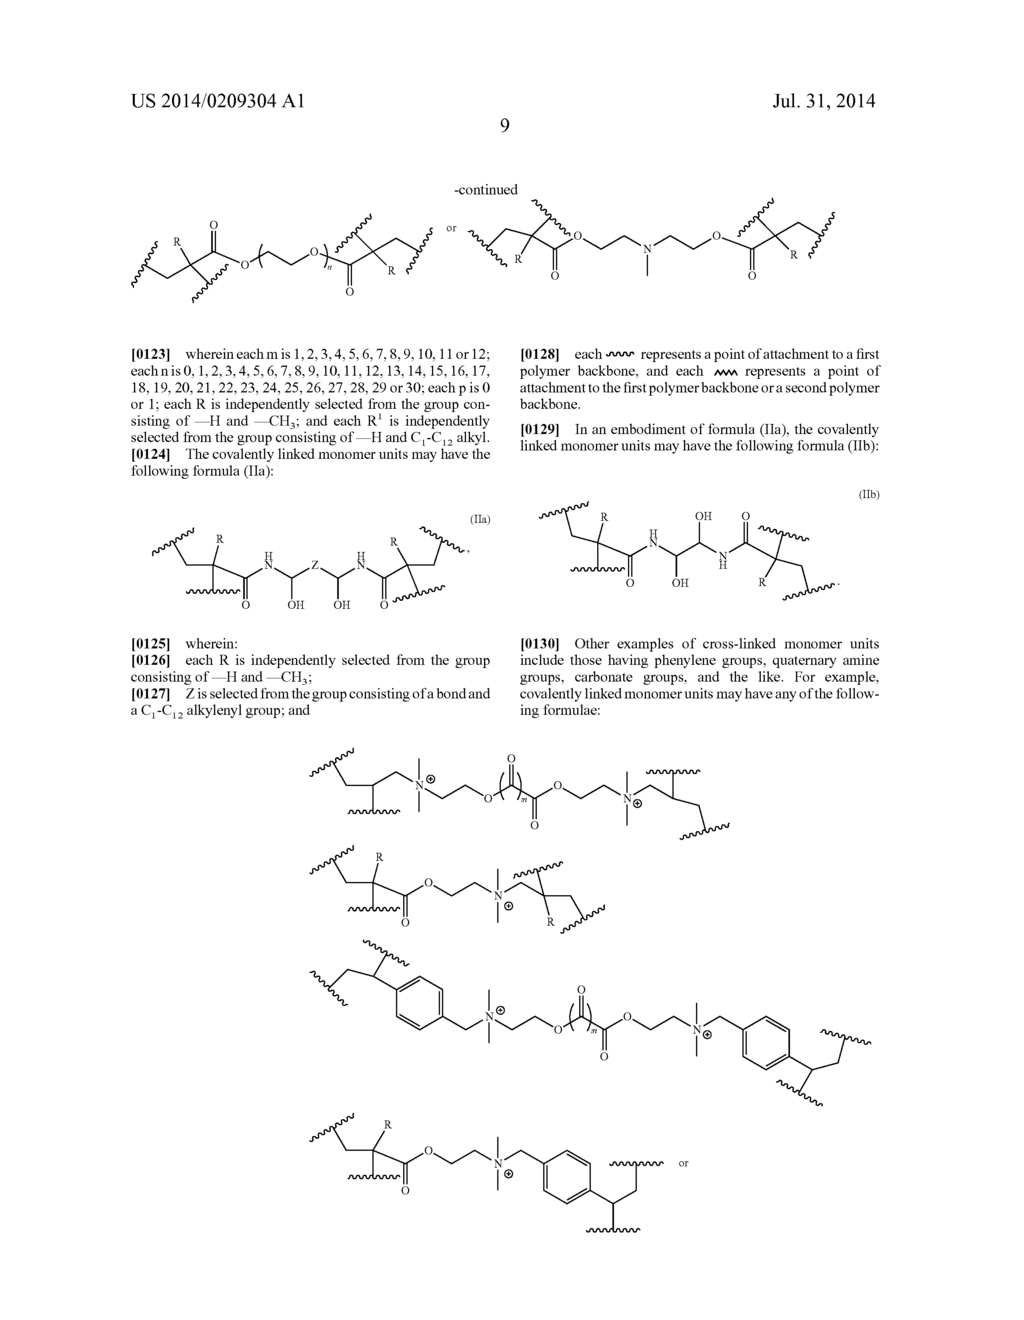 MOBILITY CONTROL POLYMERS FOR ENHANCED OIL RECOVERY - diagram, schematic, and image 10